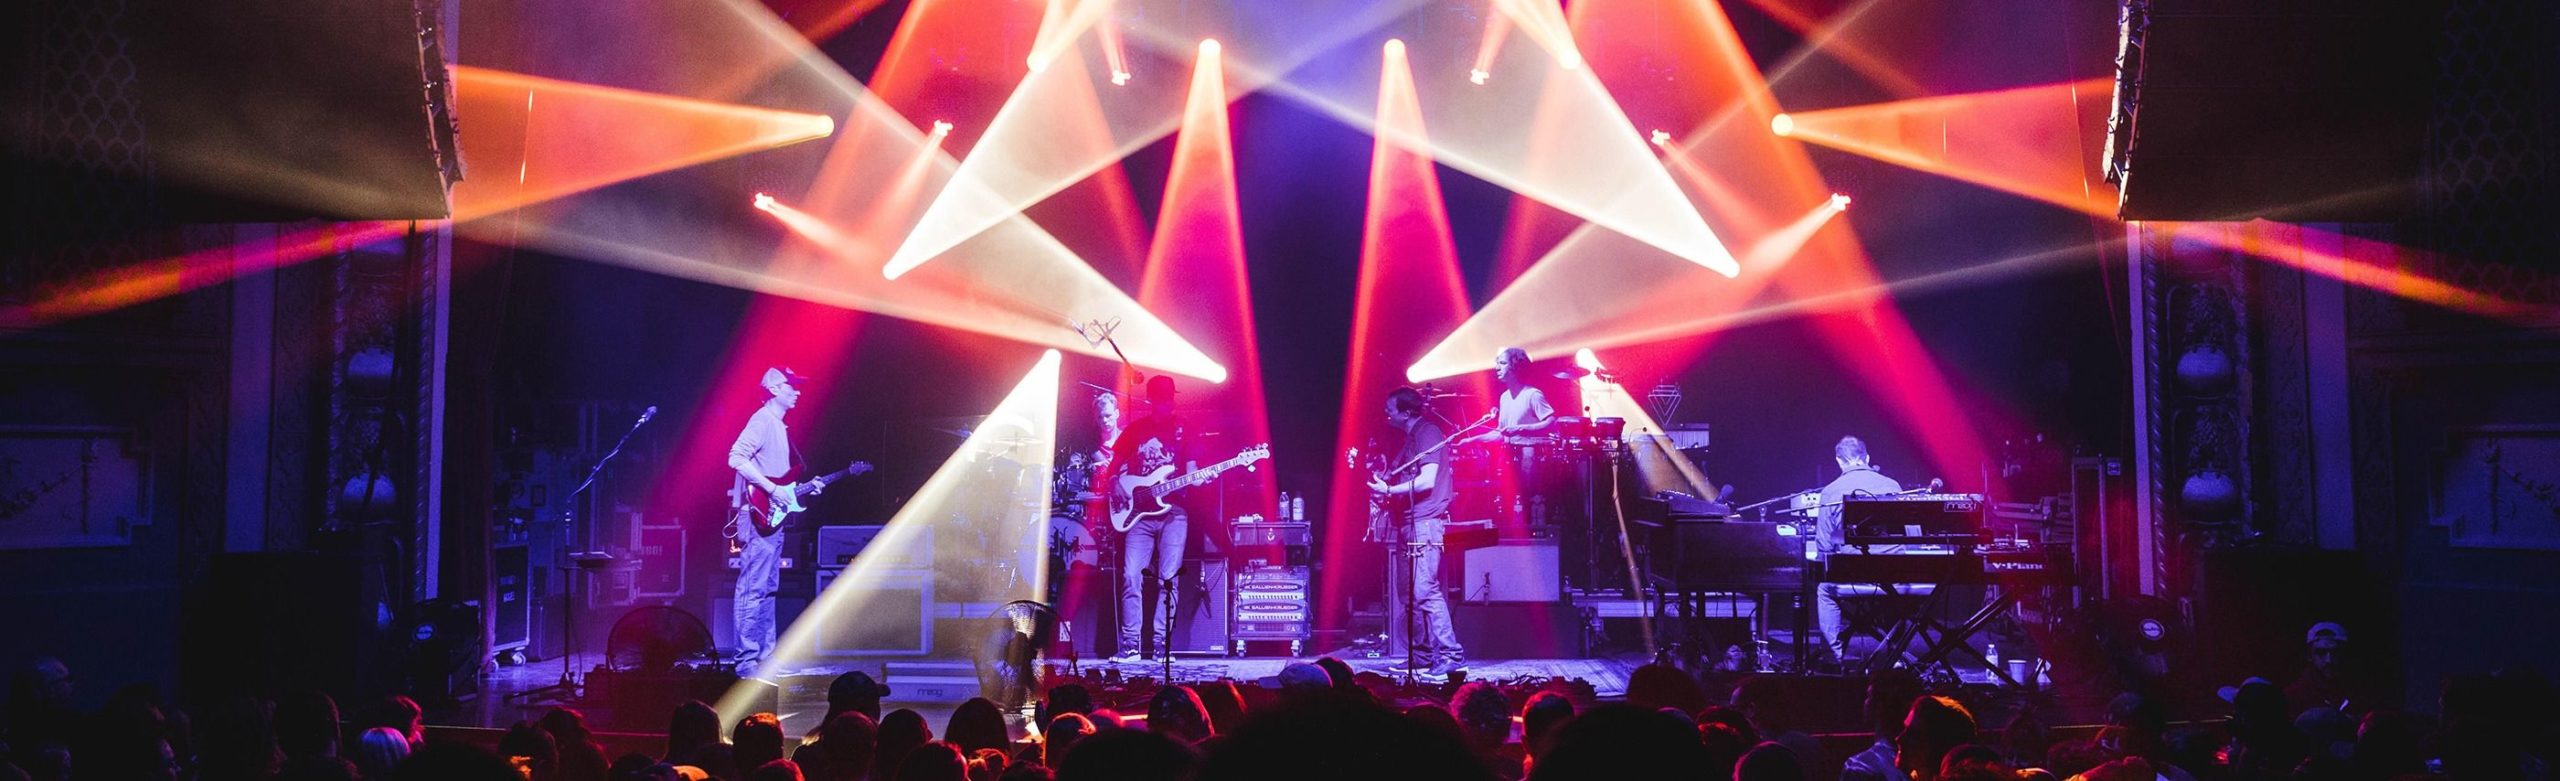 Win a Full Premium Box for Umphrey’s McGee at KettleHouse Amphitheater! Image